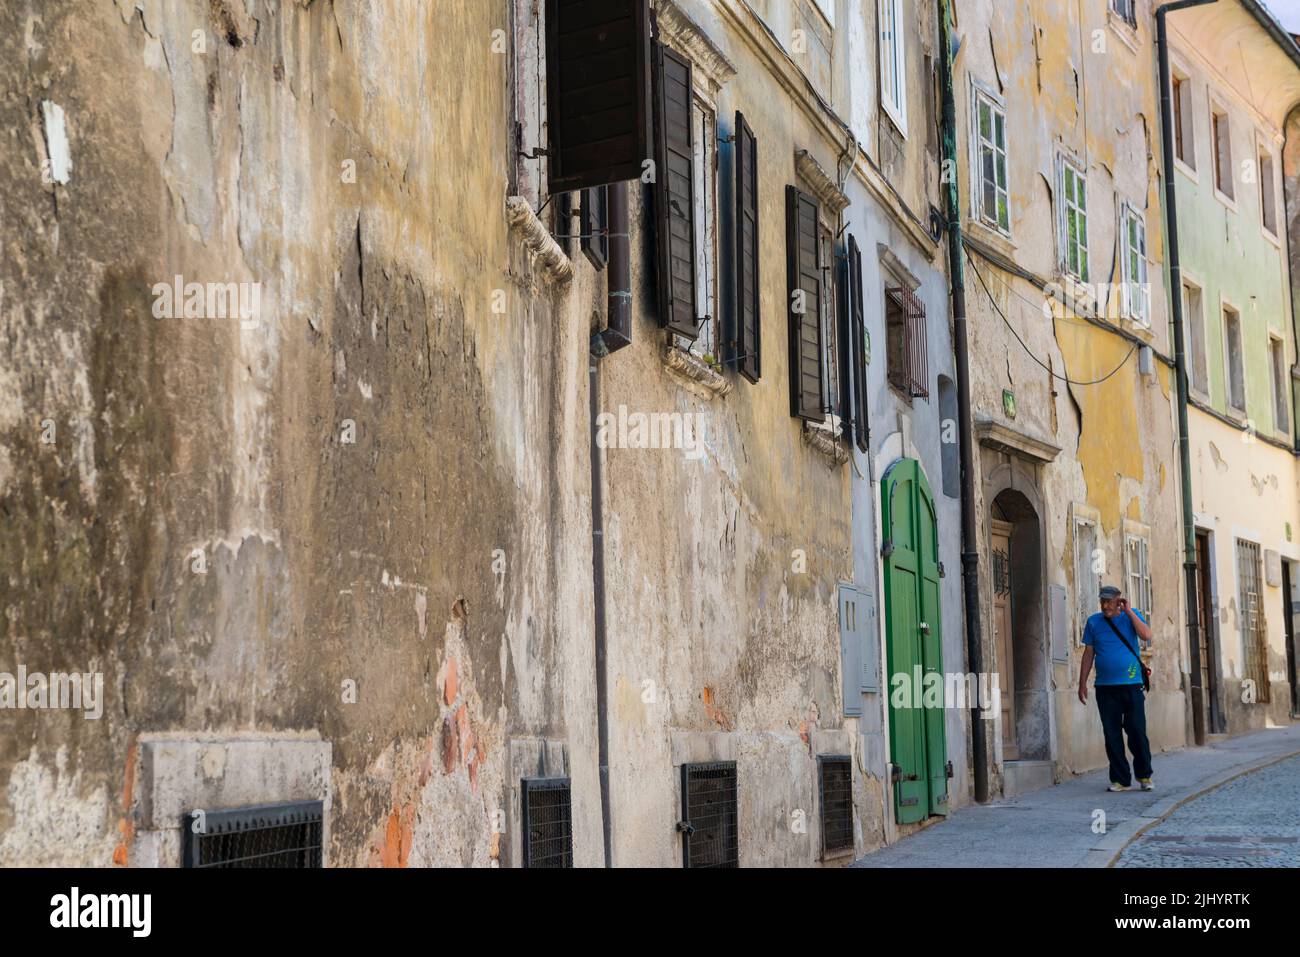 Male person in blue t shirt walking  along old unkempt houses in the old town of Ljubljana, Slovenia Stock Photo